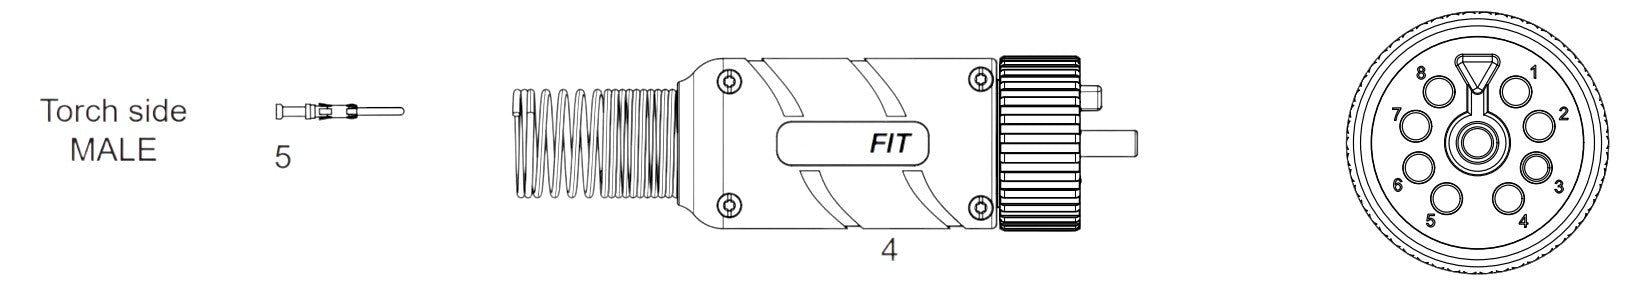 diagram of male end of intellifit modular plasma leads